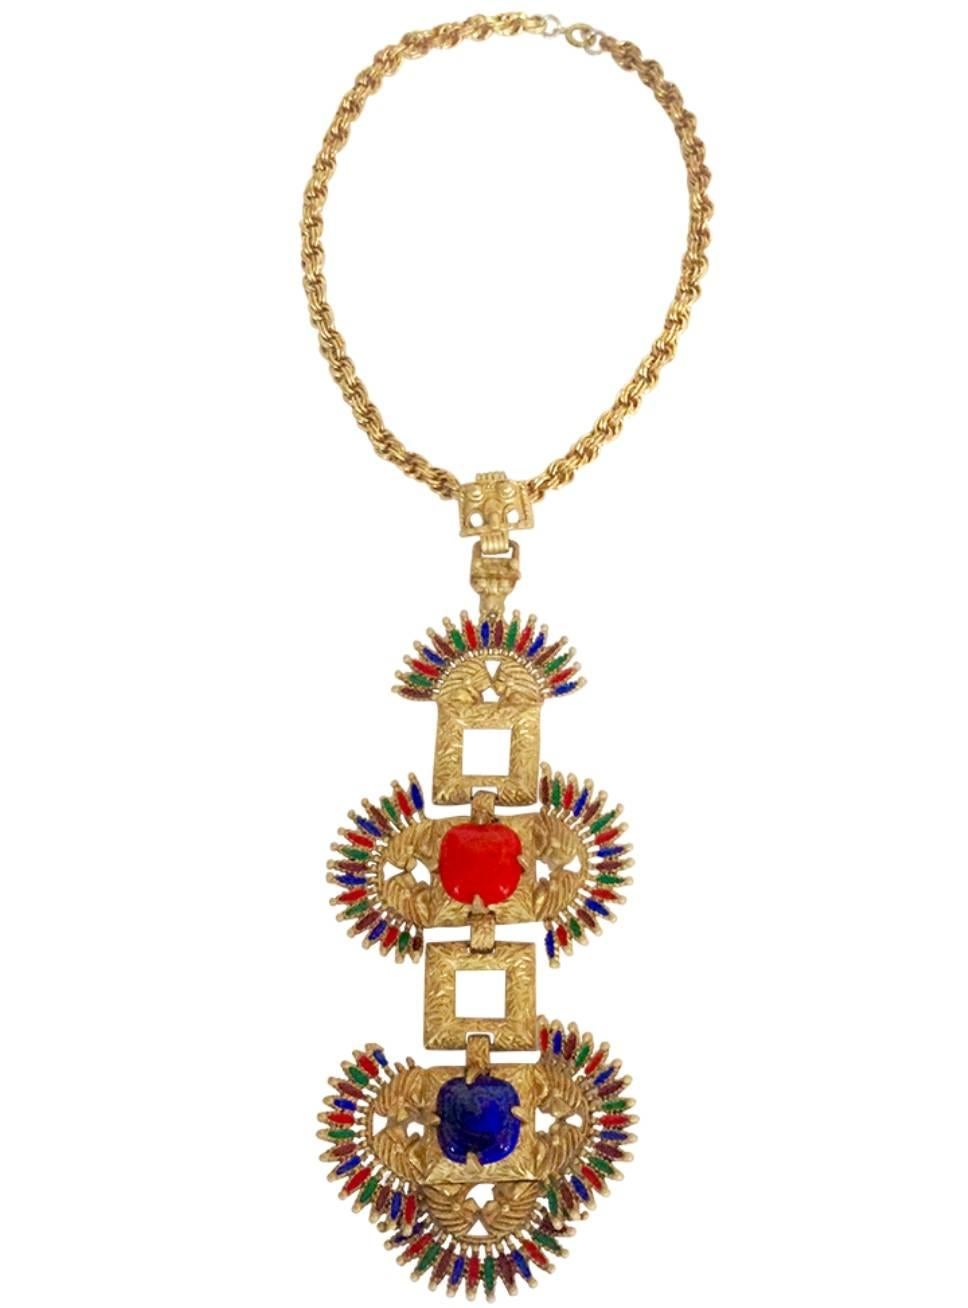 Incredible & rare Larry Vrba for Castlecliff 1970's "Runway" gold plate and enamel pendant necklace, "Kissing Indians". Coral & Lapis faux semi precious glass stones. Enamel details in blue, red, green and wine. This